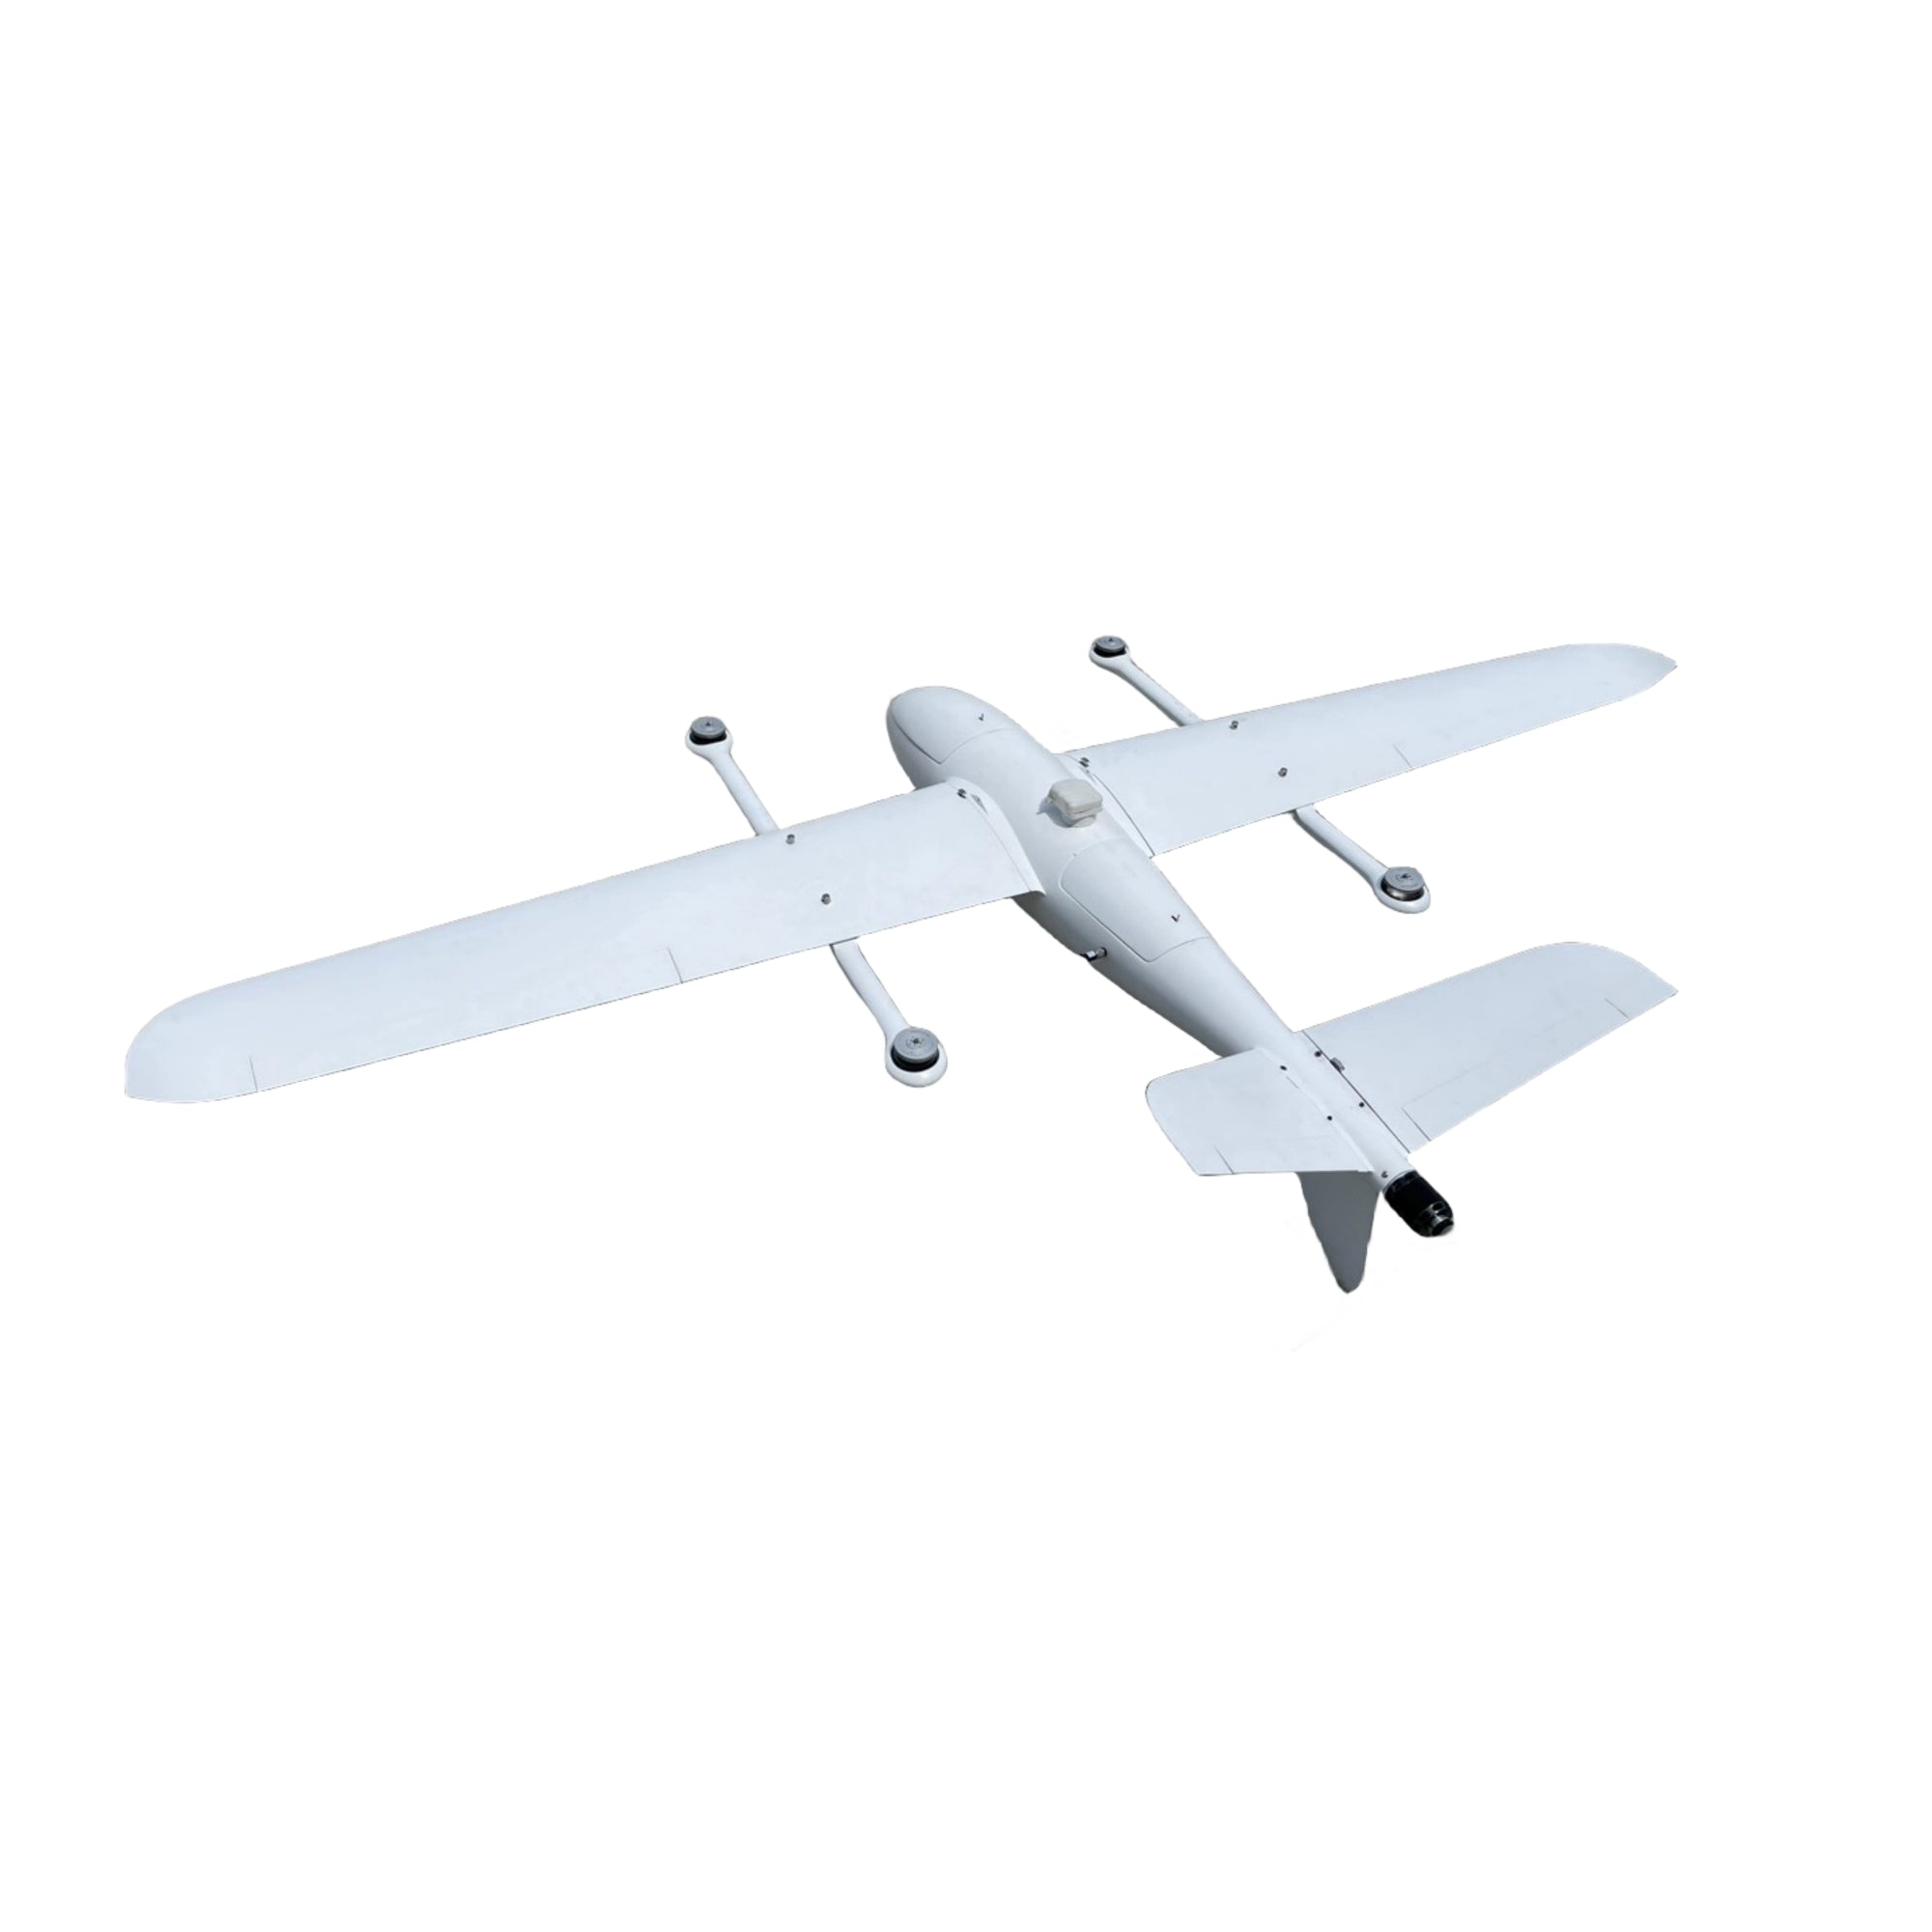 UnmannedRC Dragon CM VTOL Plane For Drone Mapping and Aerial Surveying - Unmanned RC